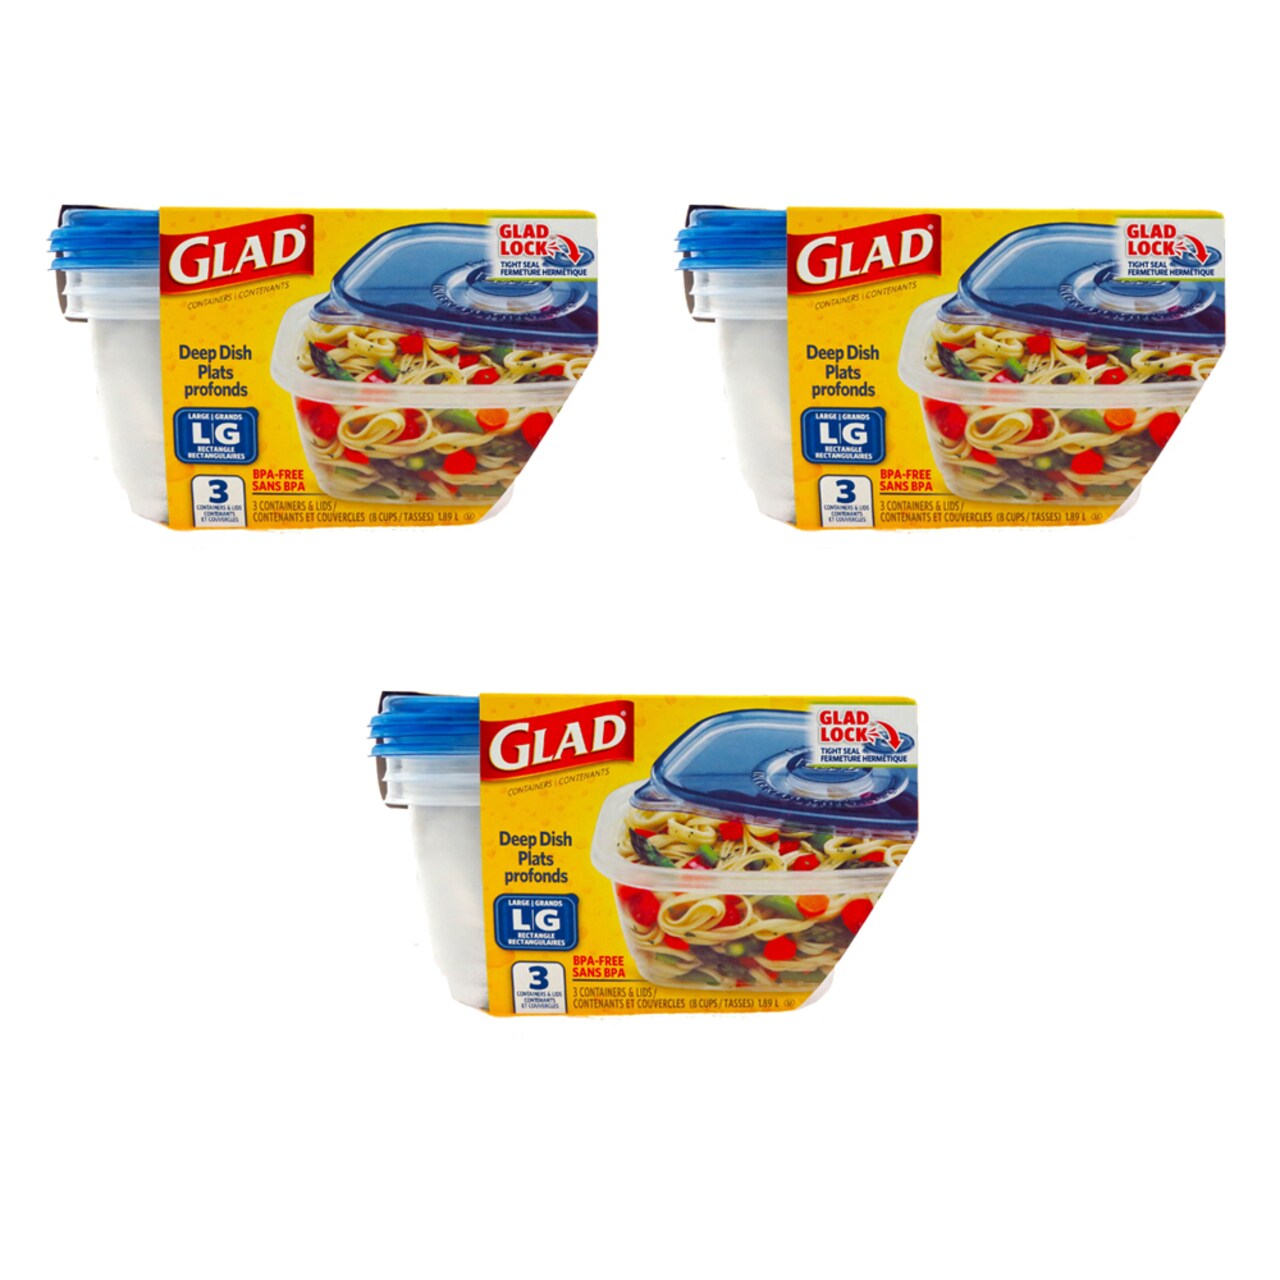 Glad Entree M size, 5 containers (Pack of 3)